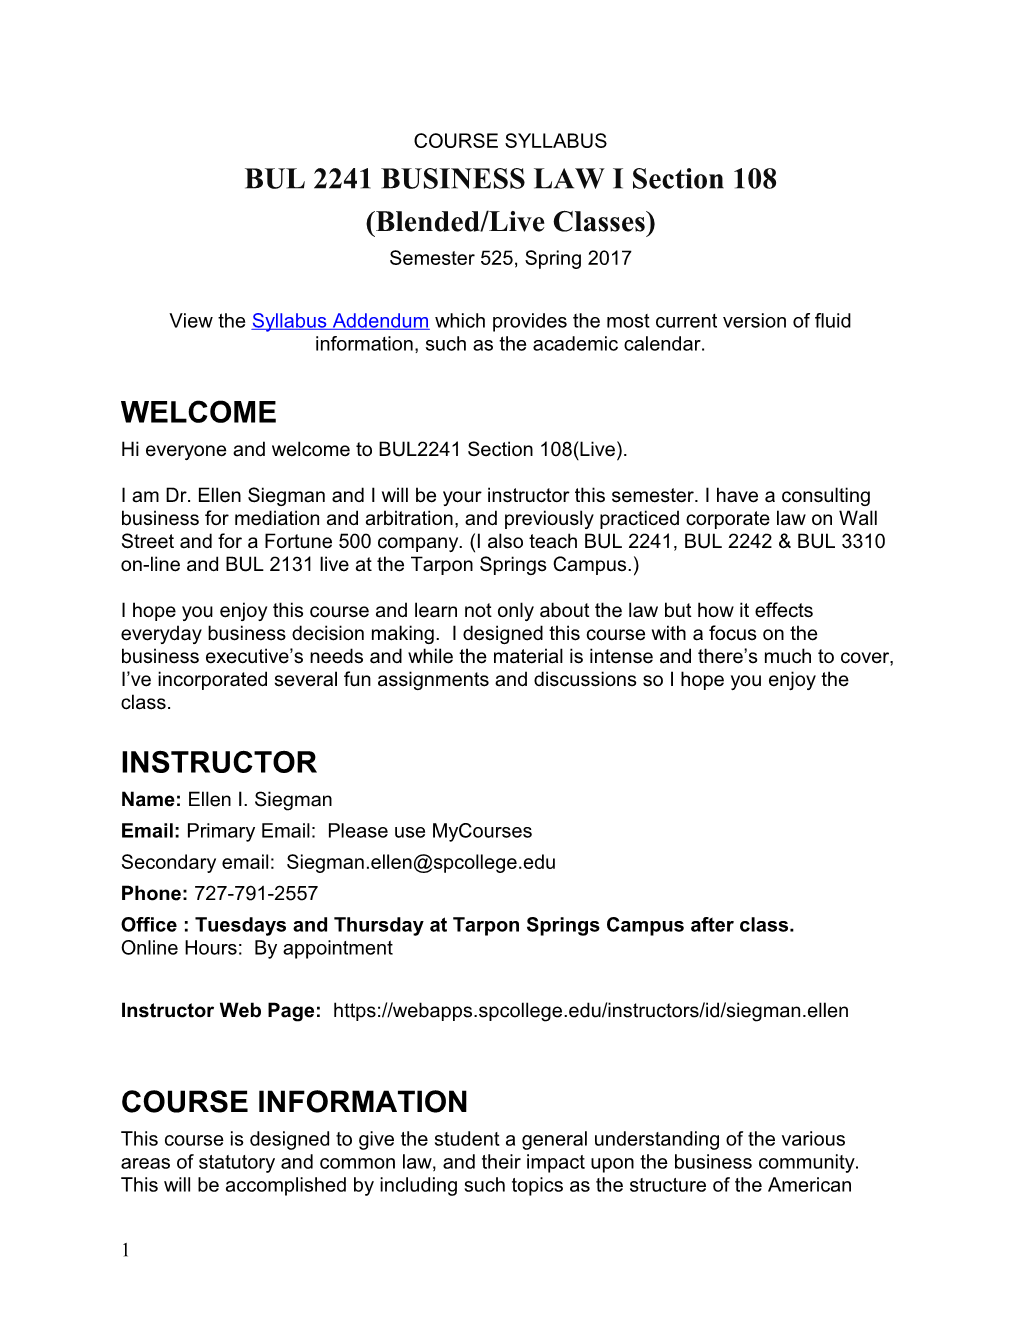 BUL 2241 BUSINESS LAW I Section 108